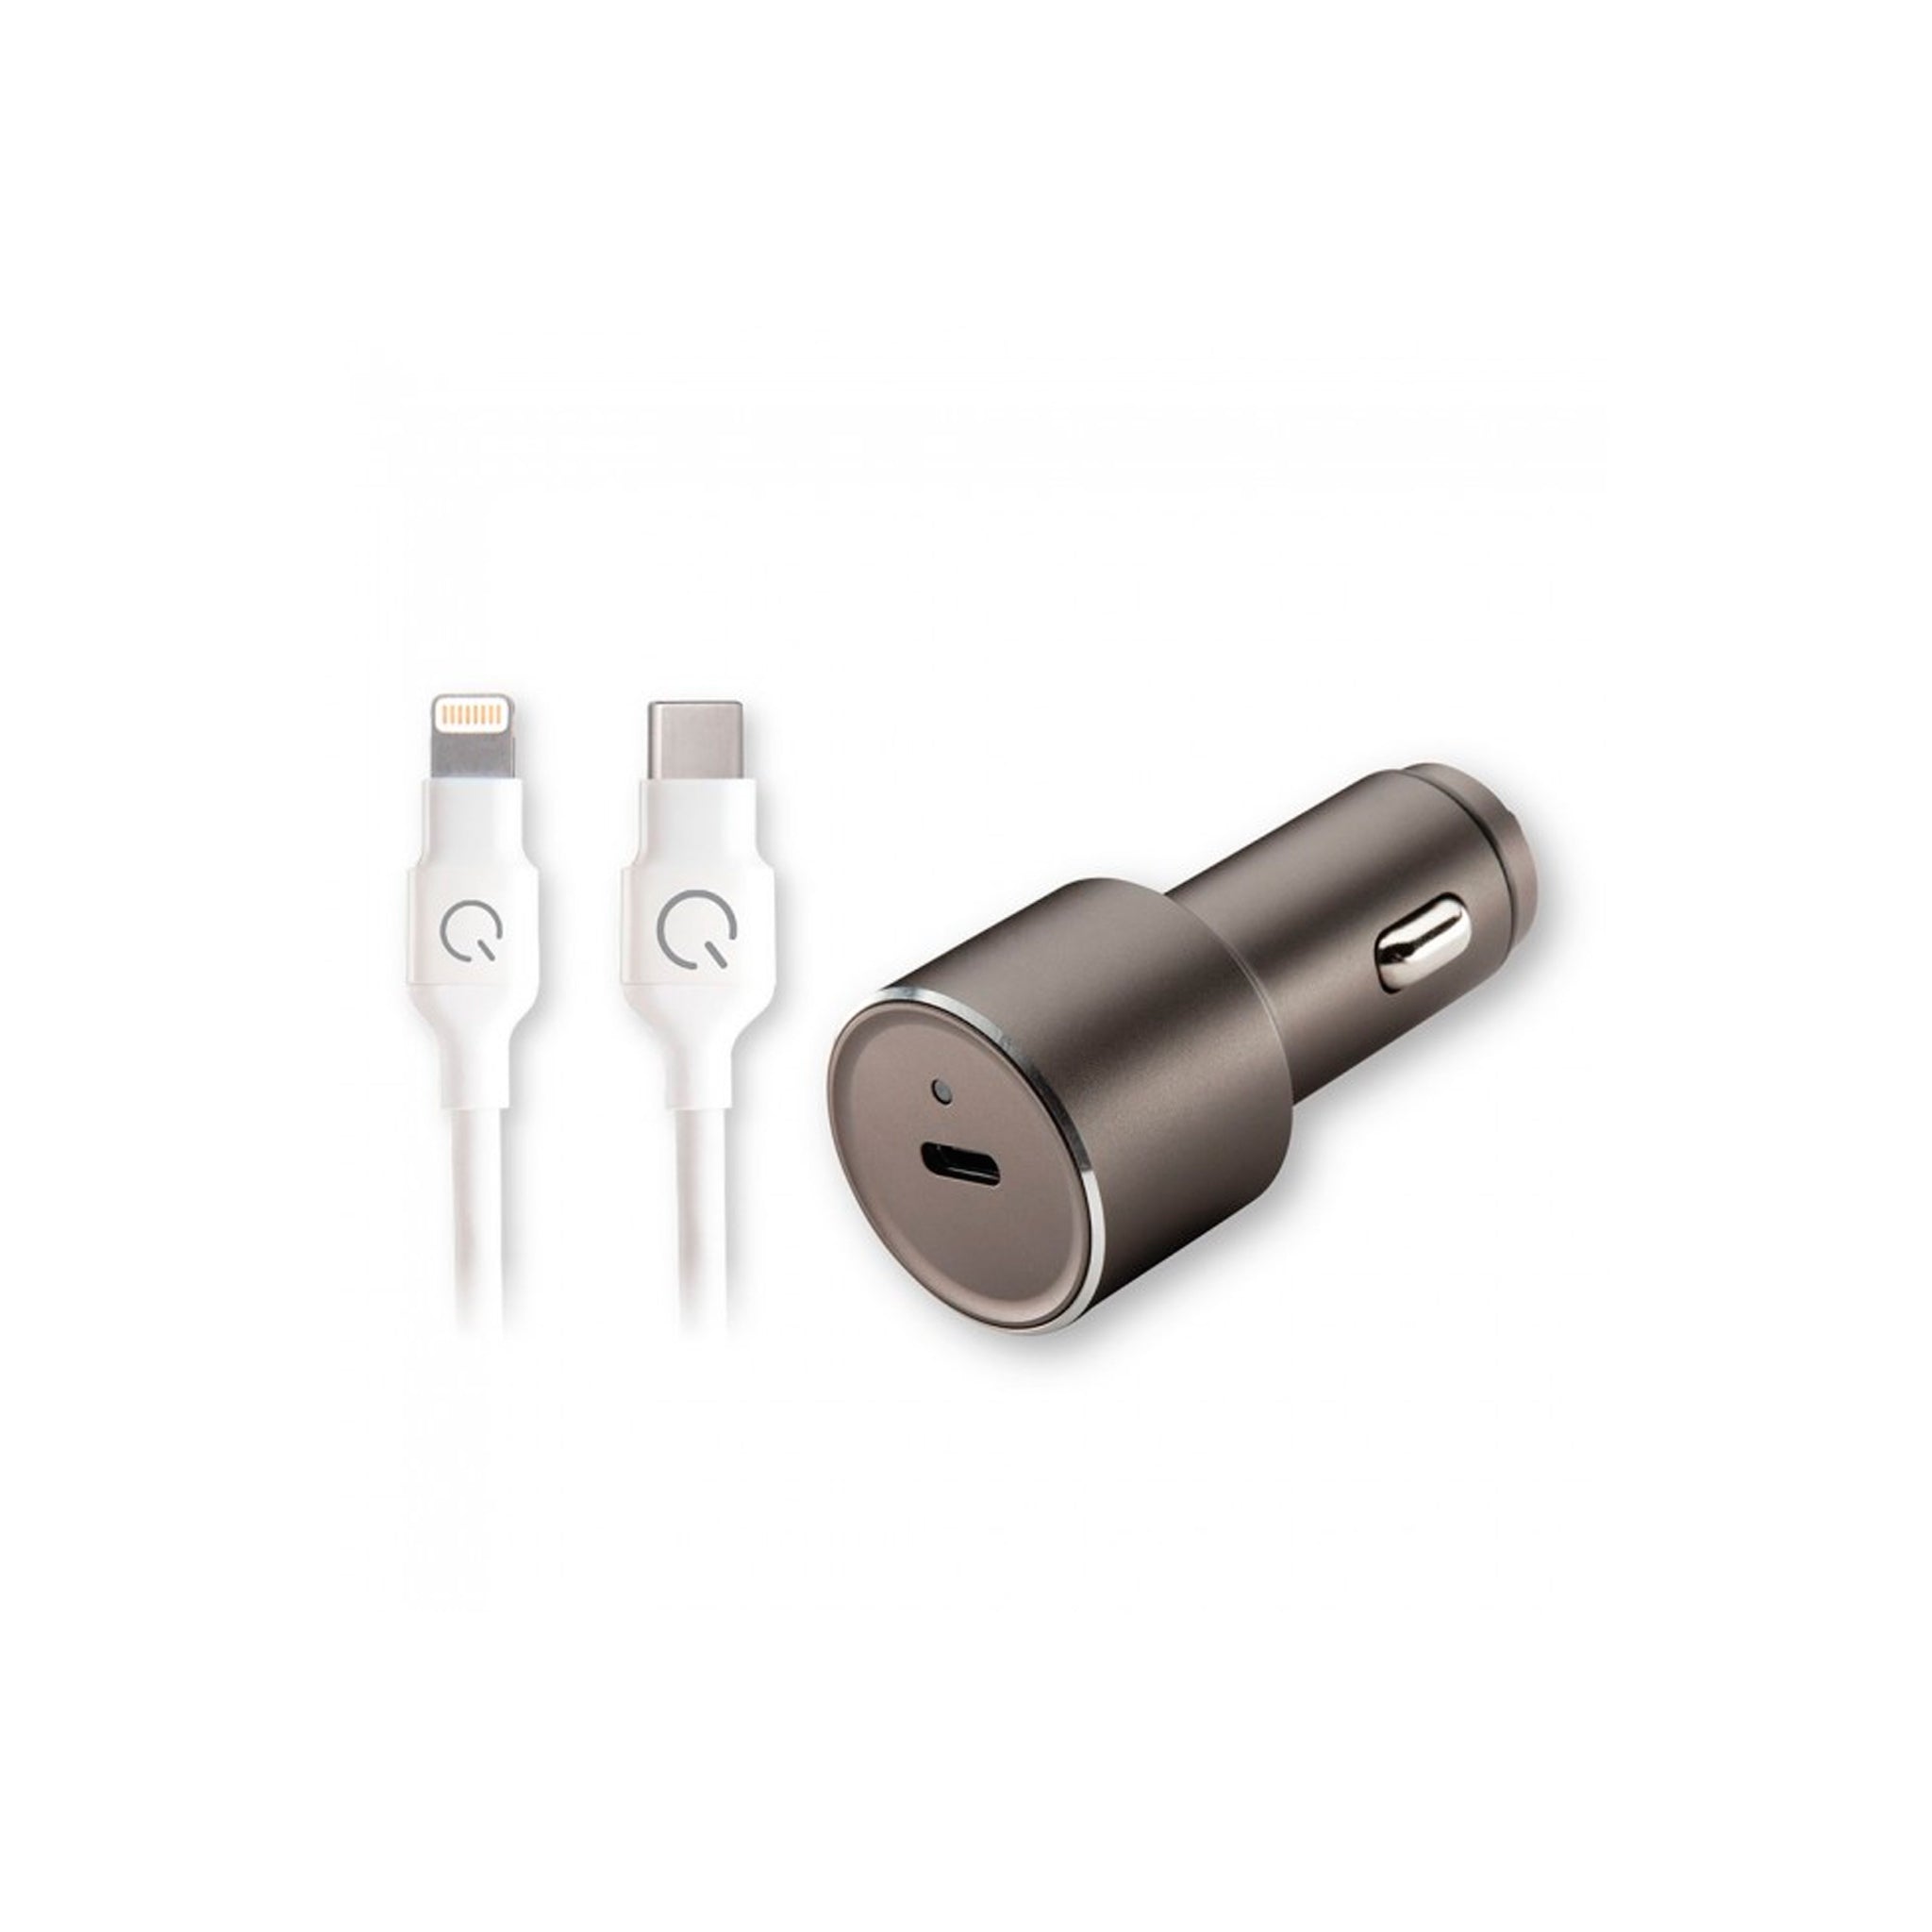 Qmadix - Car Charger Power Delivery For Apple Lightning Devices - White And Gray